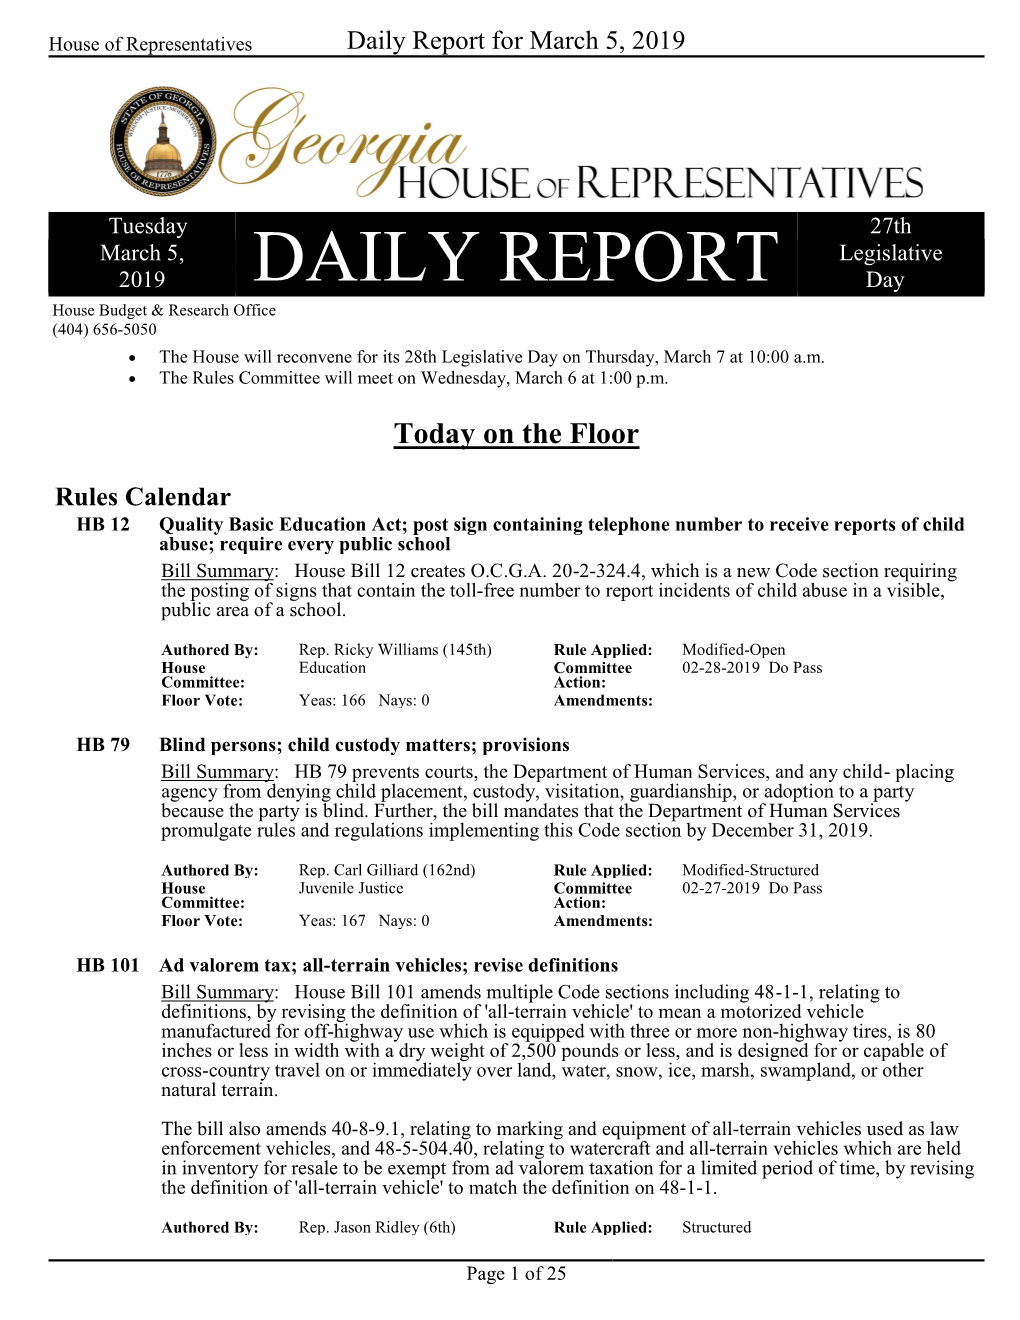 DAILY REPORT 27Th